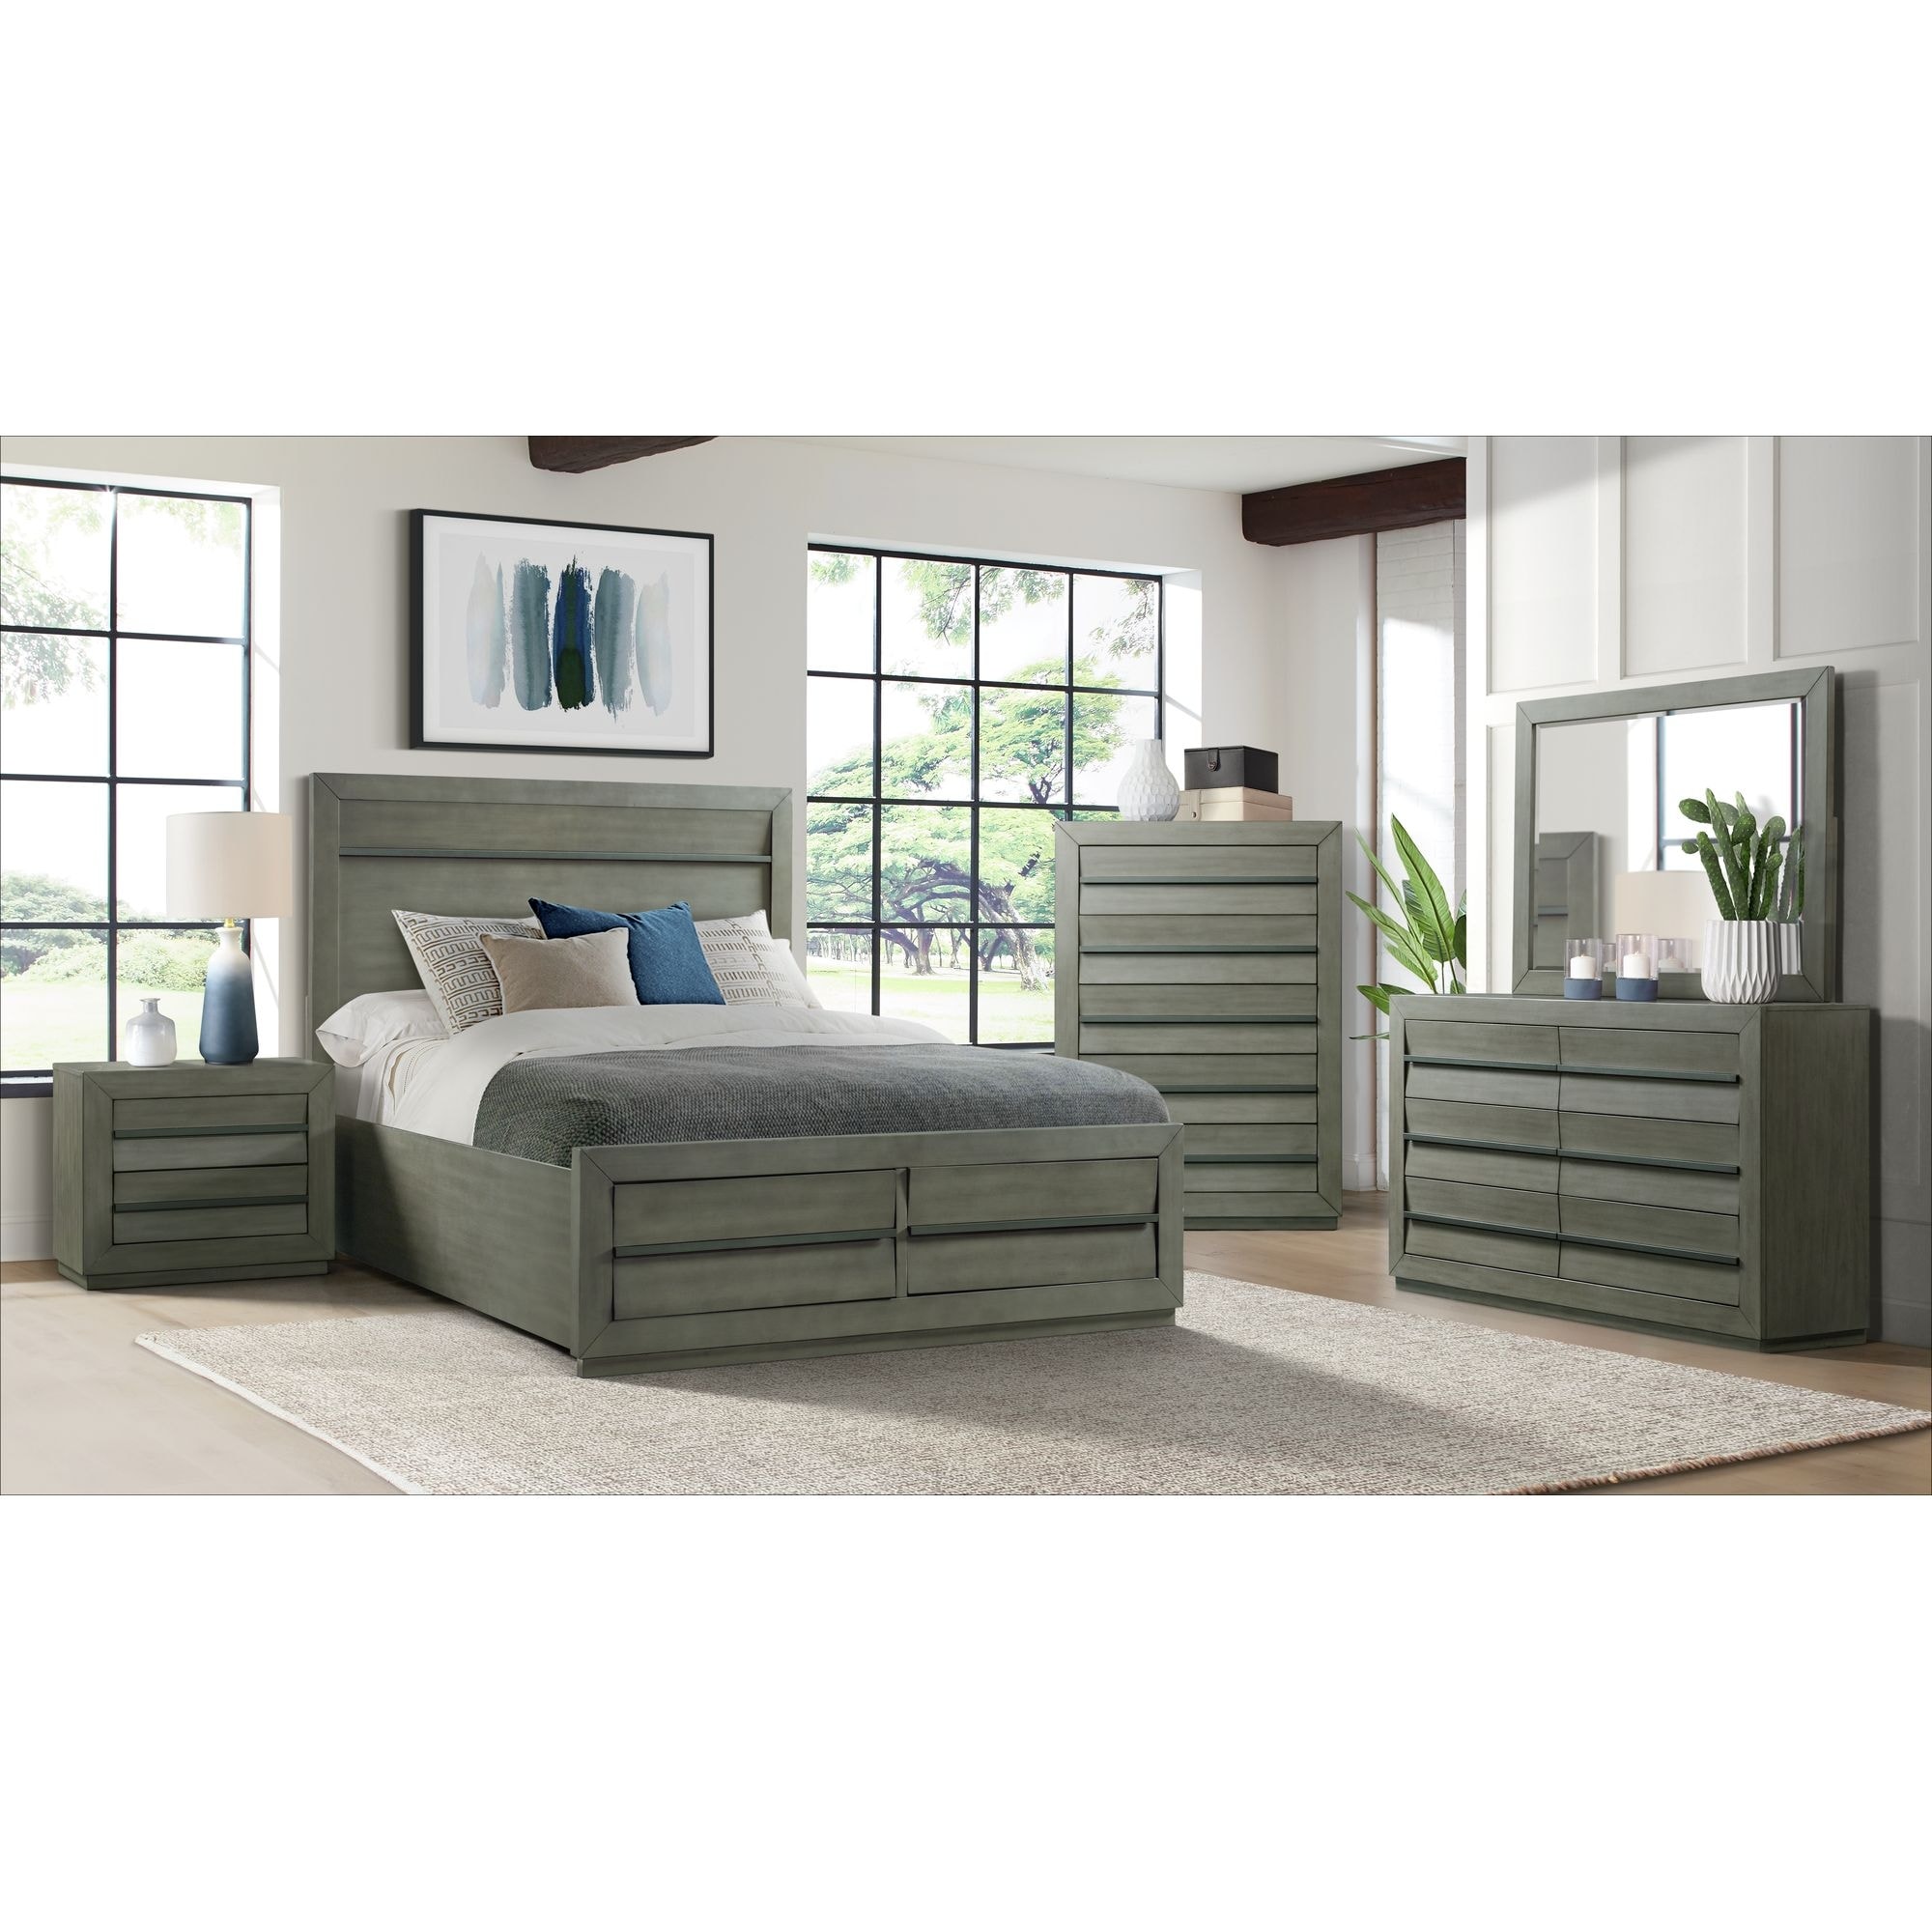 Picket House Furnishings Cosmo Queen Storage 5pc Bedroom Set In Grey